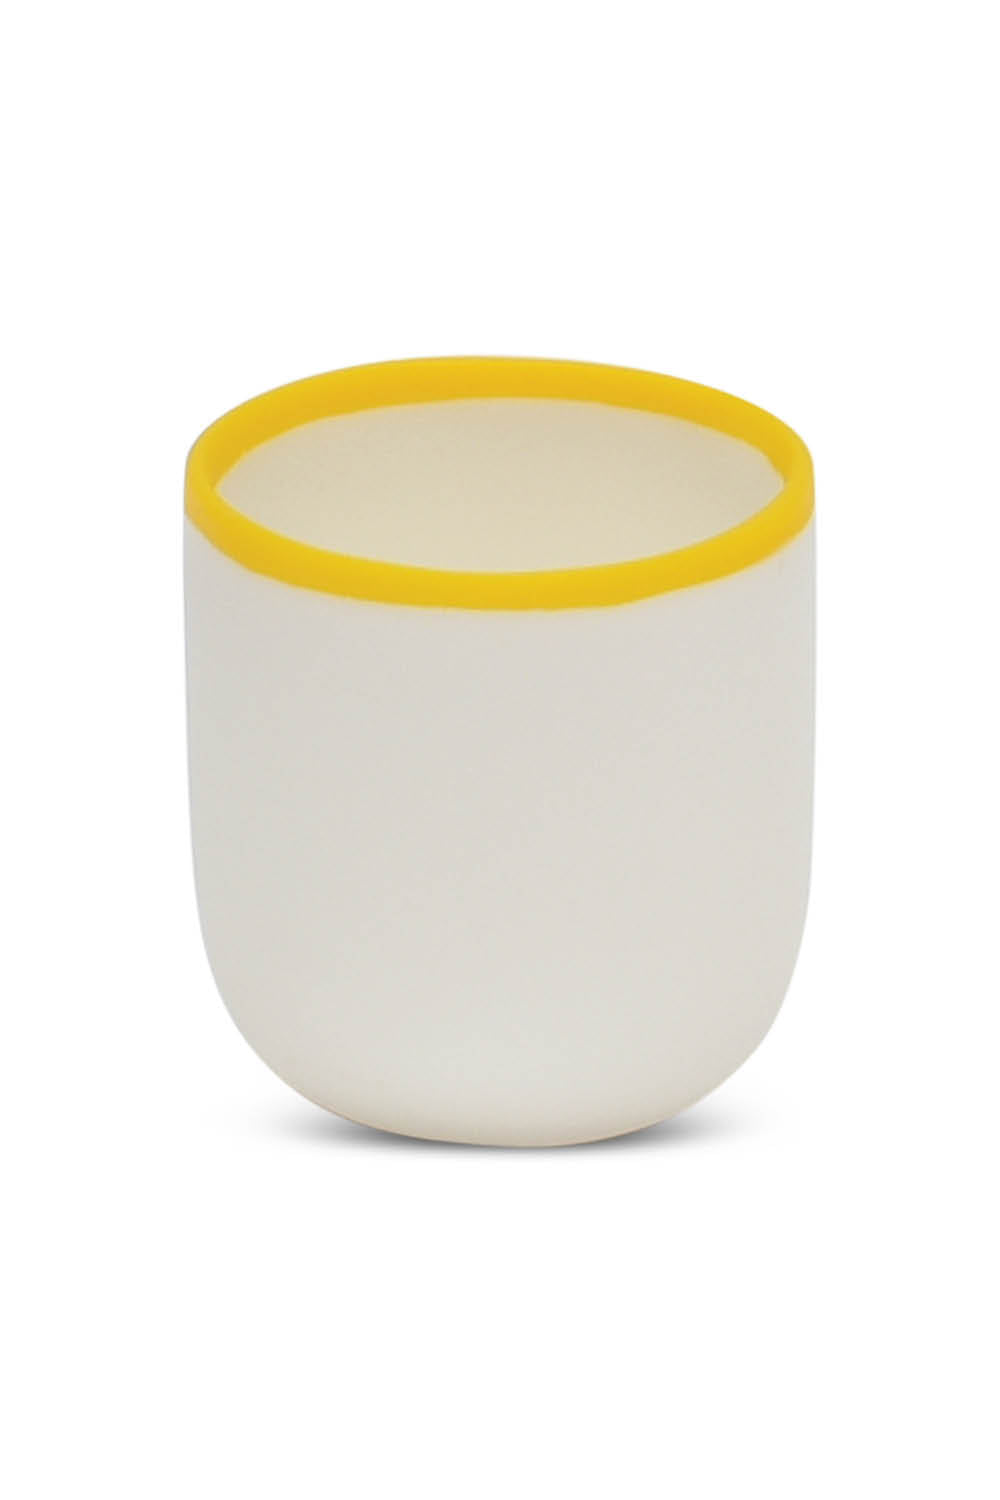 LIGNE Short Cup in White With Sunshine Yellow Rim